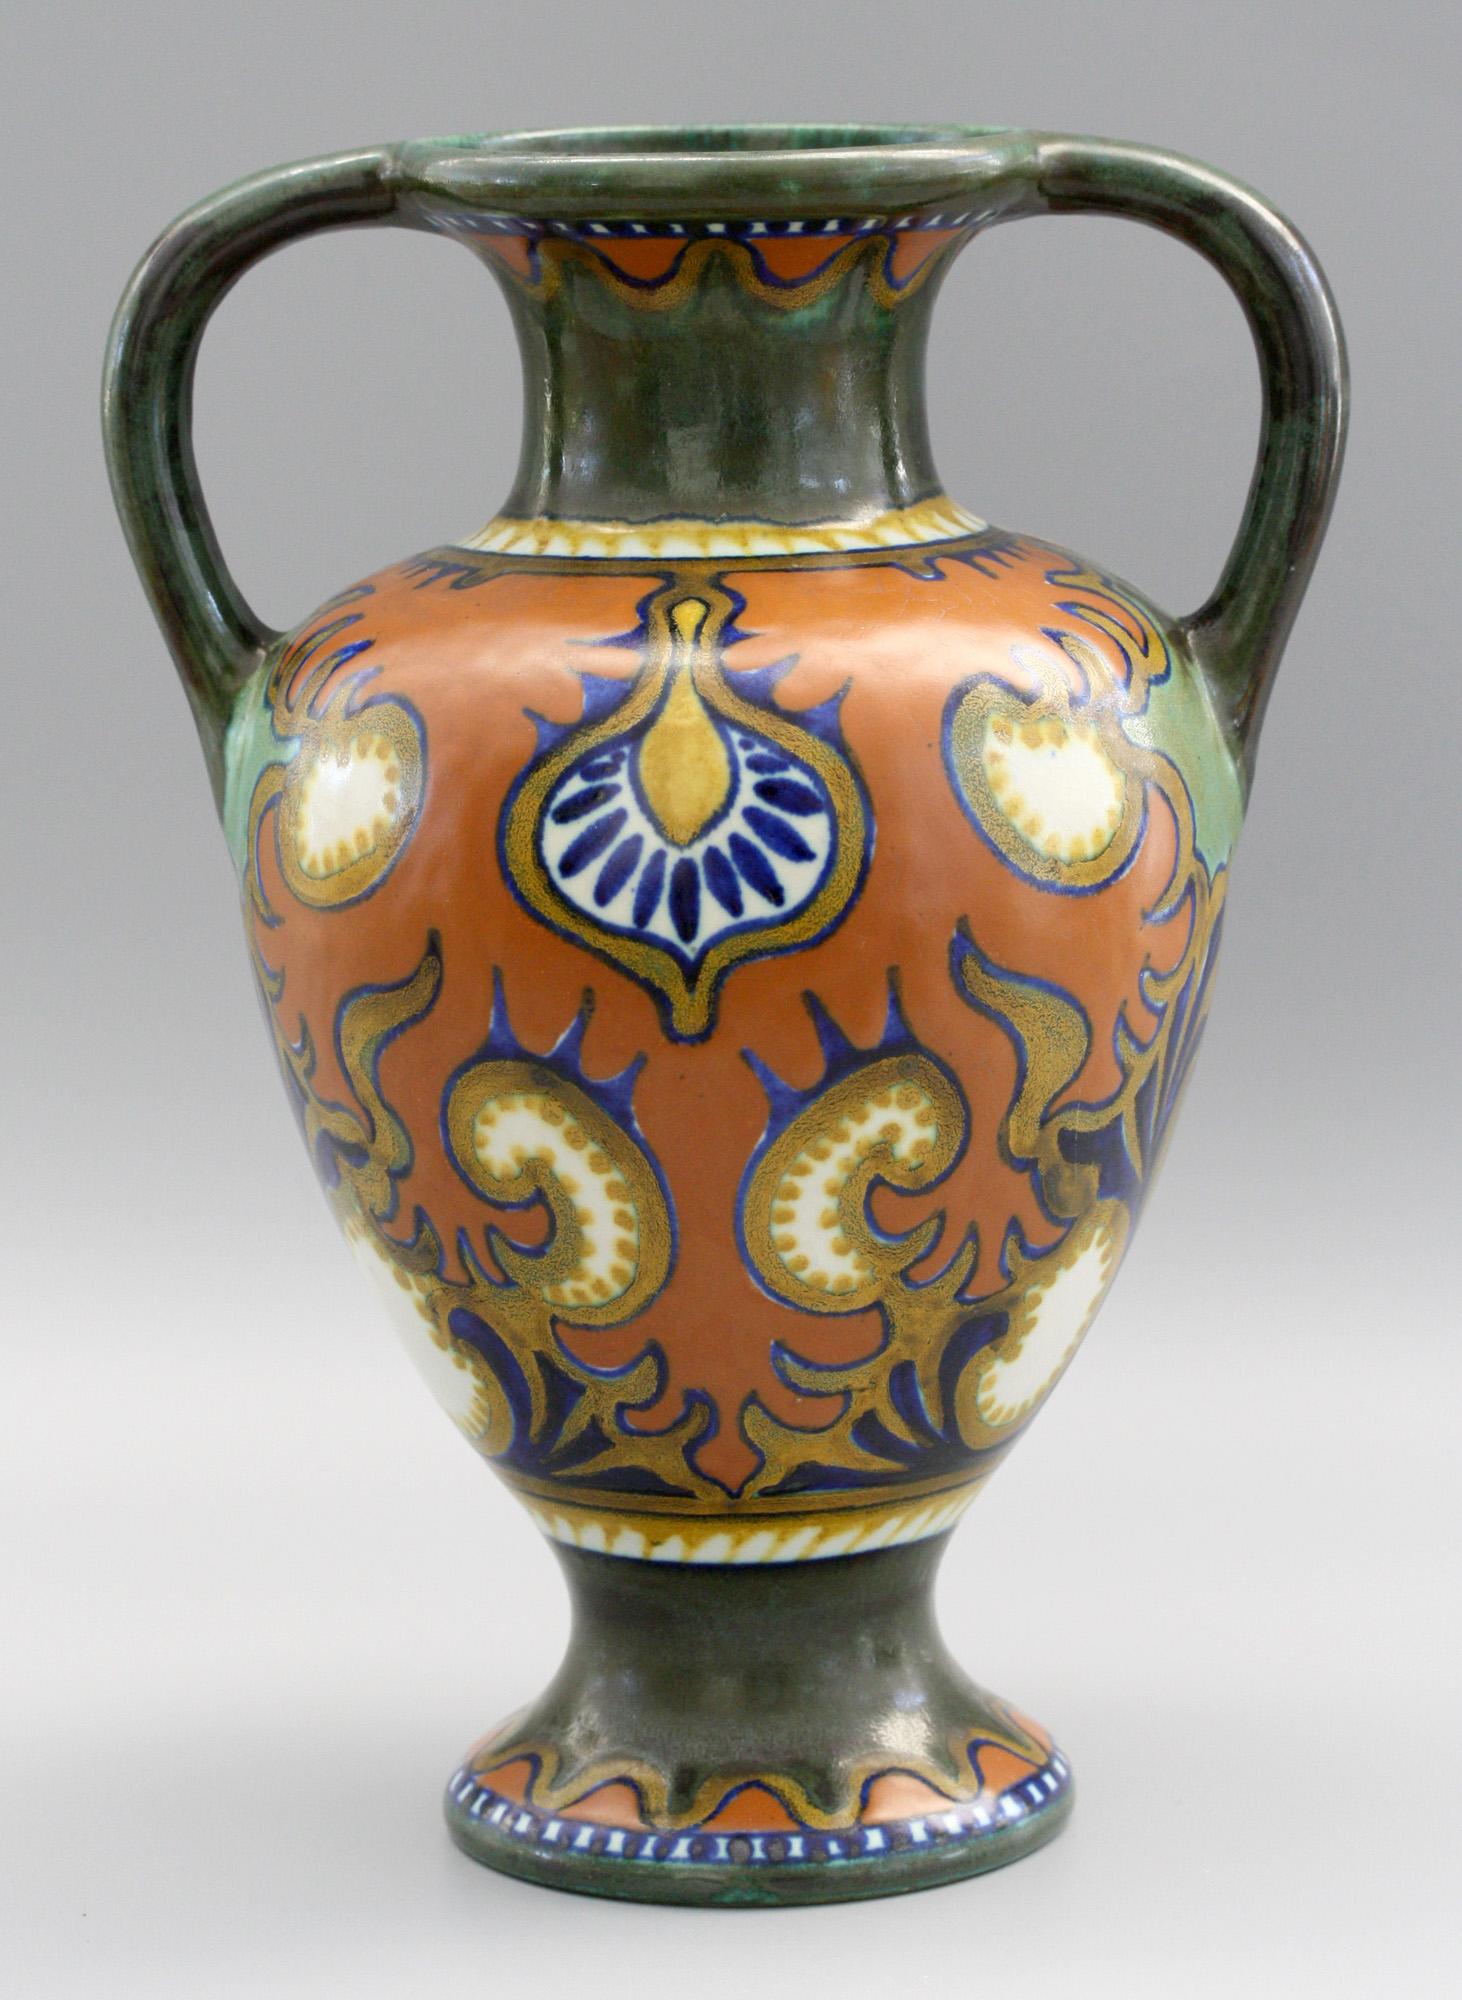 A very stylish Dutch Gouda Art Deco amphora shaped twin handled art pottery vase decorated in the Rhodian pattern and made at the Plateelbakkerij Zuid Holland and designed circa 1924. The vase stands on a rounded pedestal foot with a pear shaped